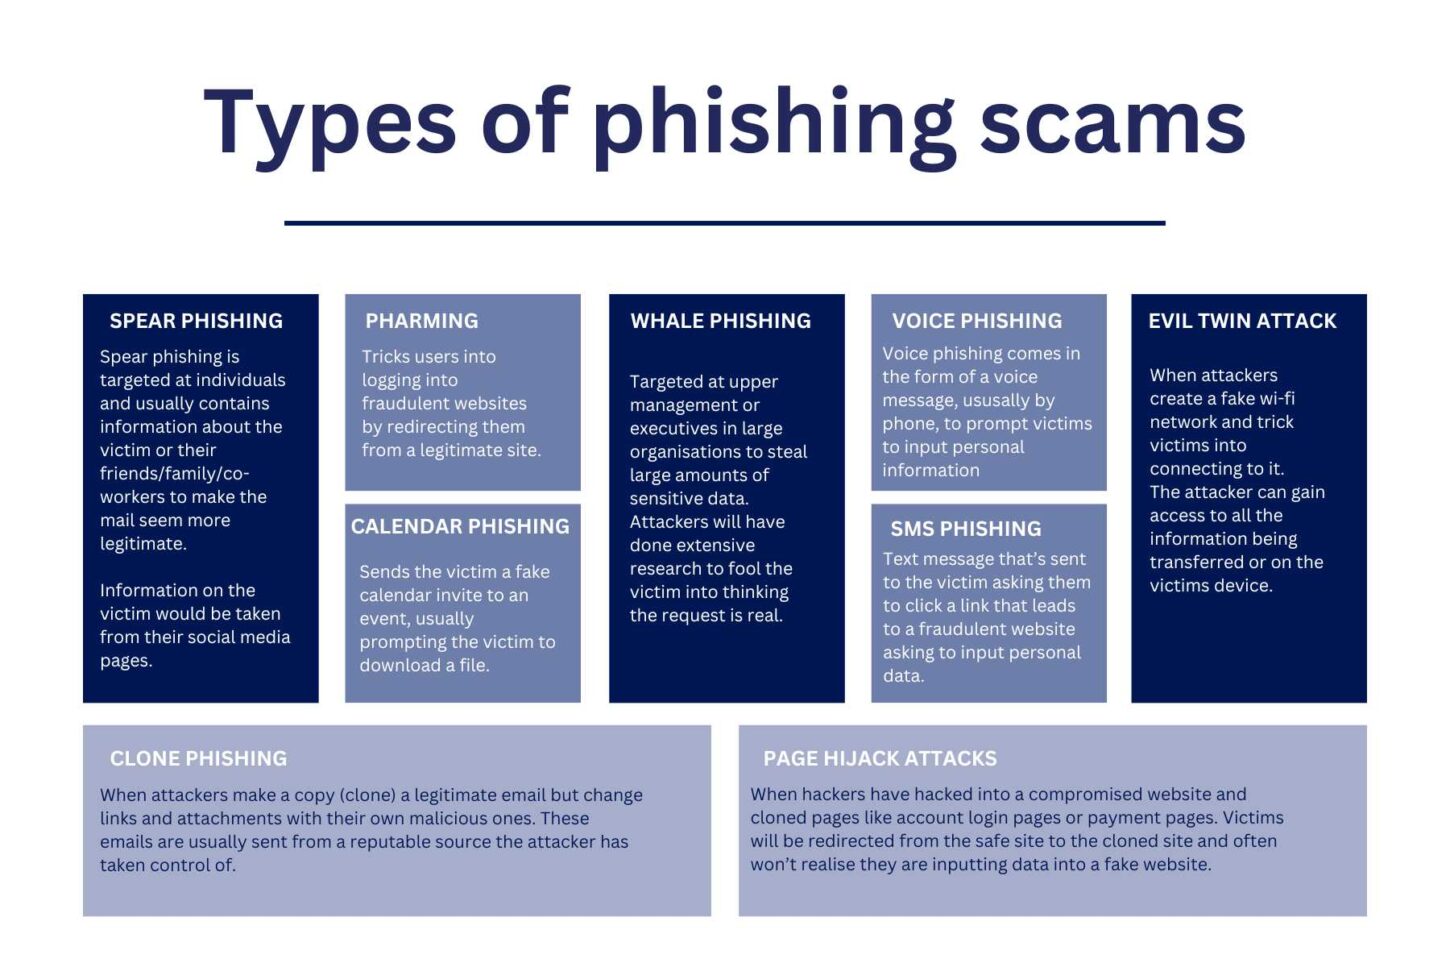 types of phishing scams, Spear phishing, pharming, calendar, clone, whale, voice, SMS, evil twin attacks, page hijack attacks.